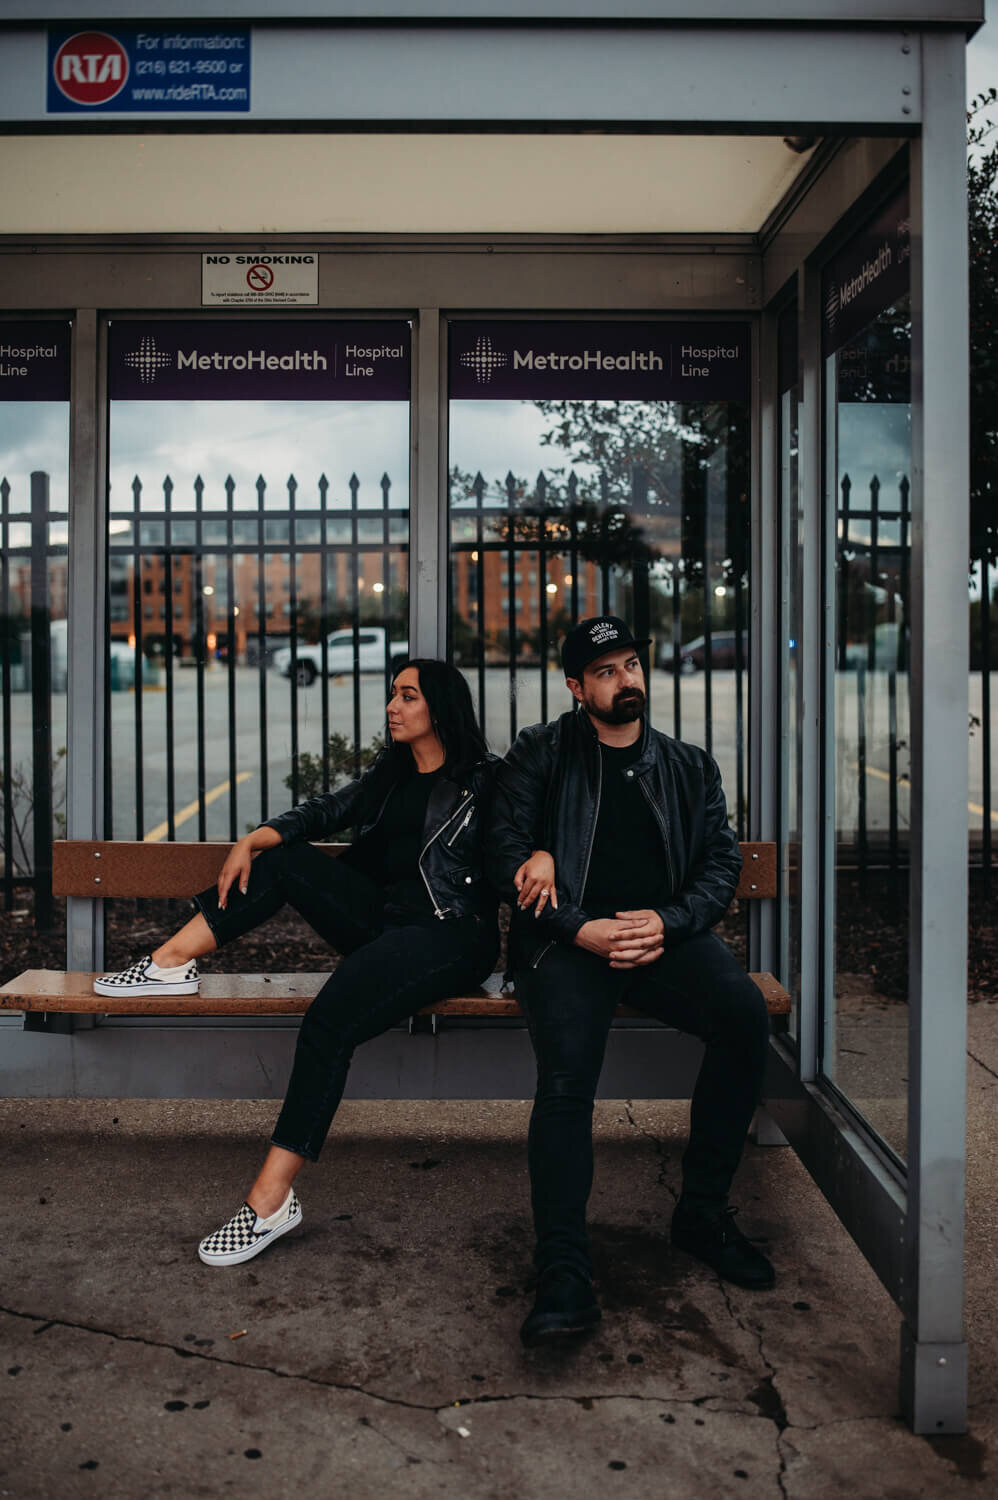 Couple sit at bus station in alternative clothing.